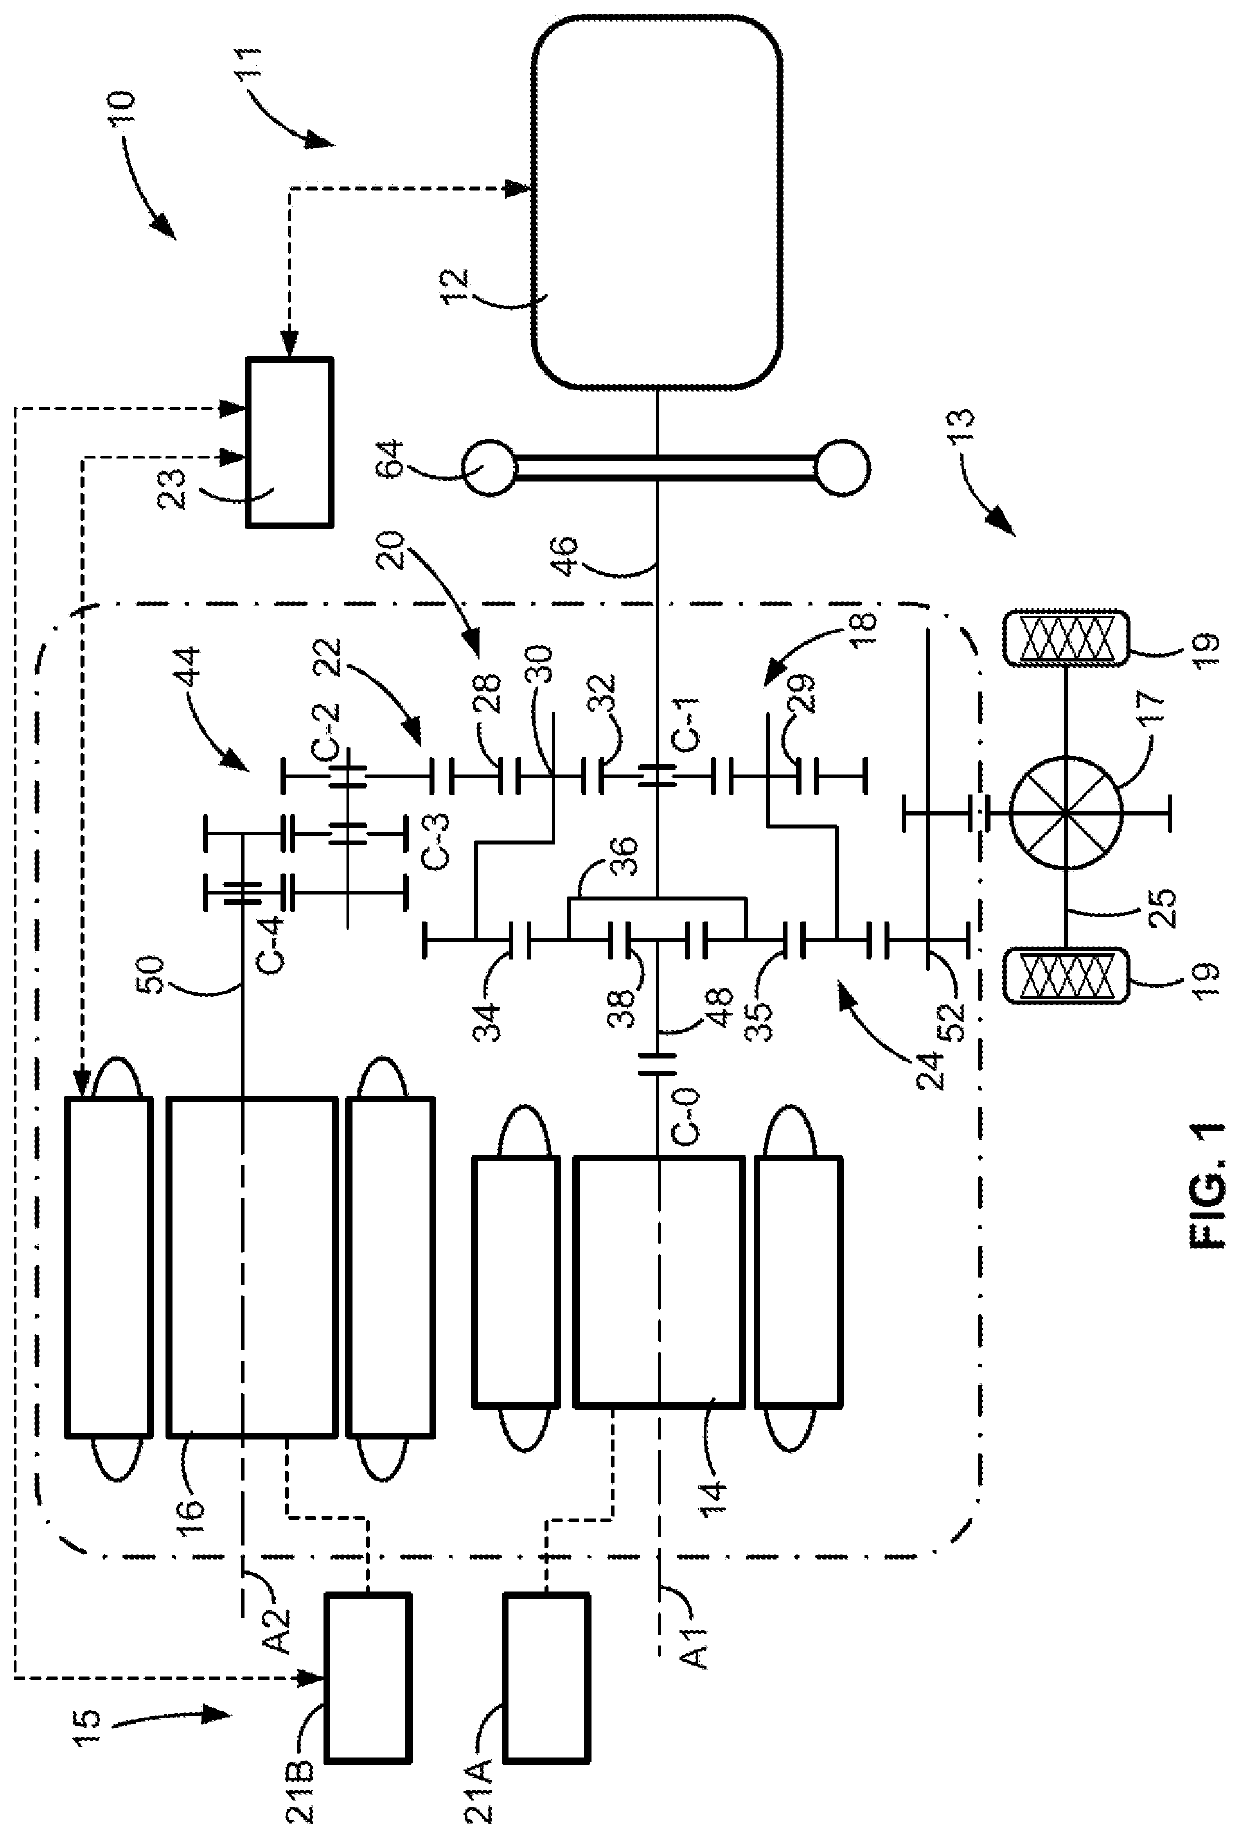 Battery pack balancing systems and control logic for multi-pack electric-drive motor vehicles